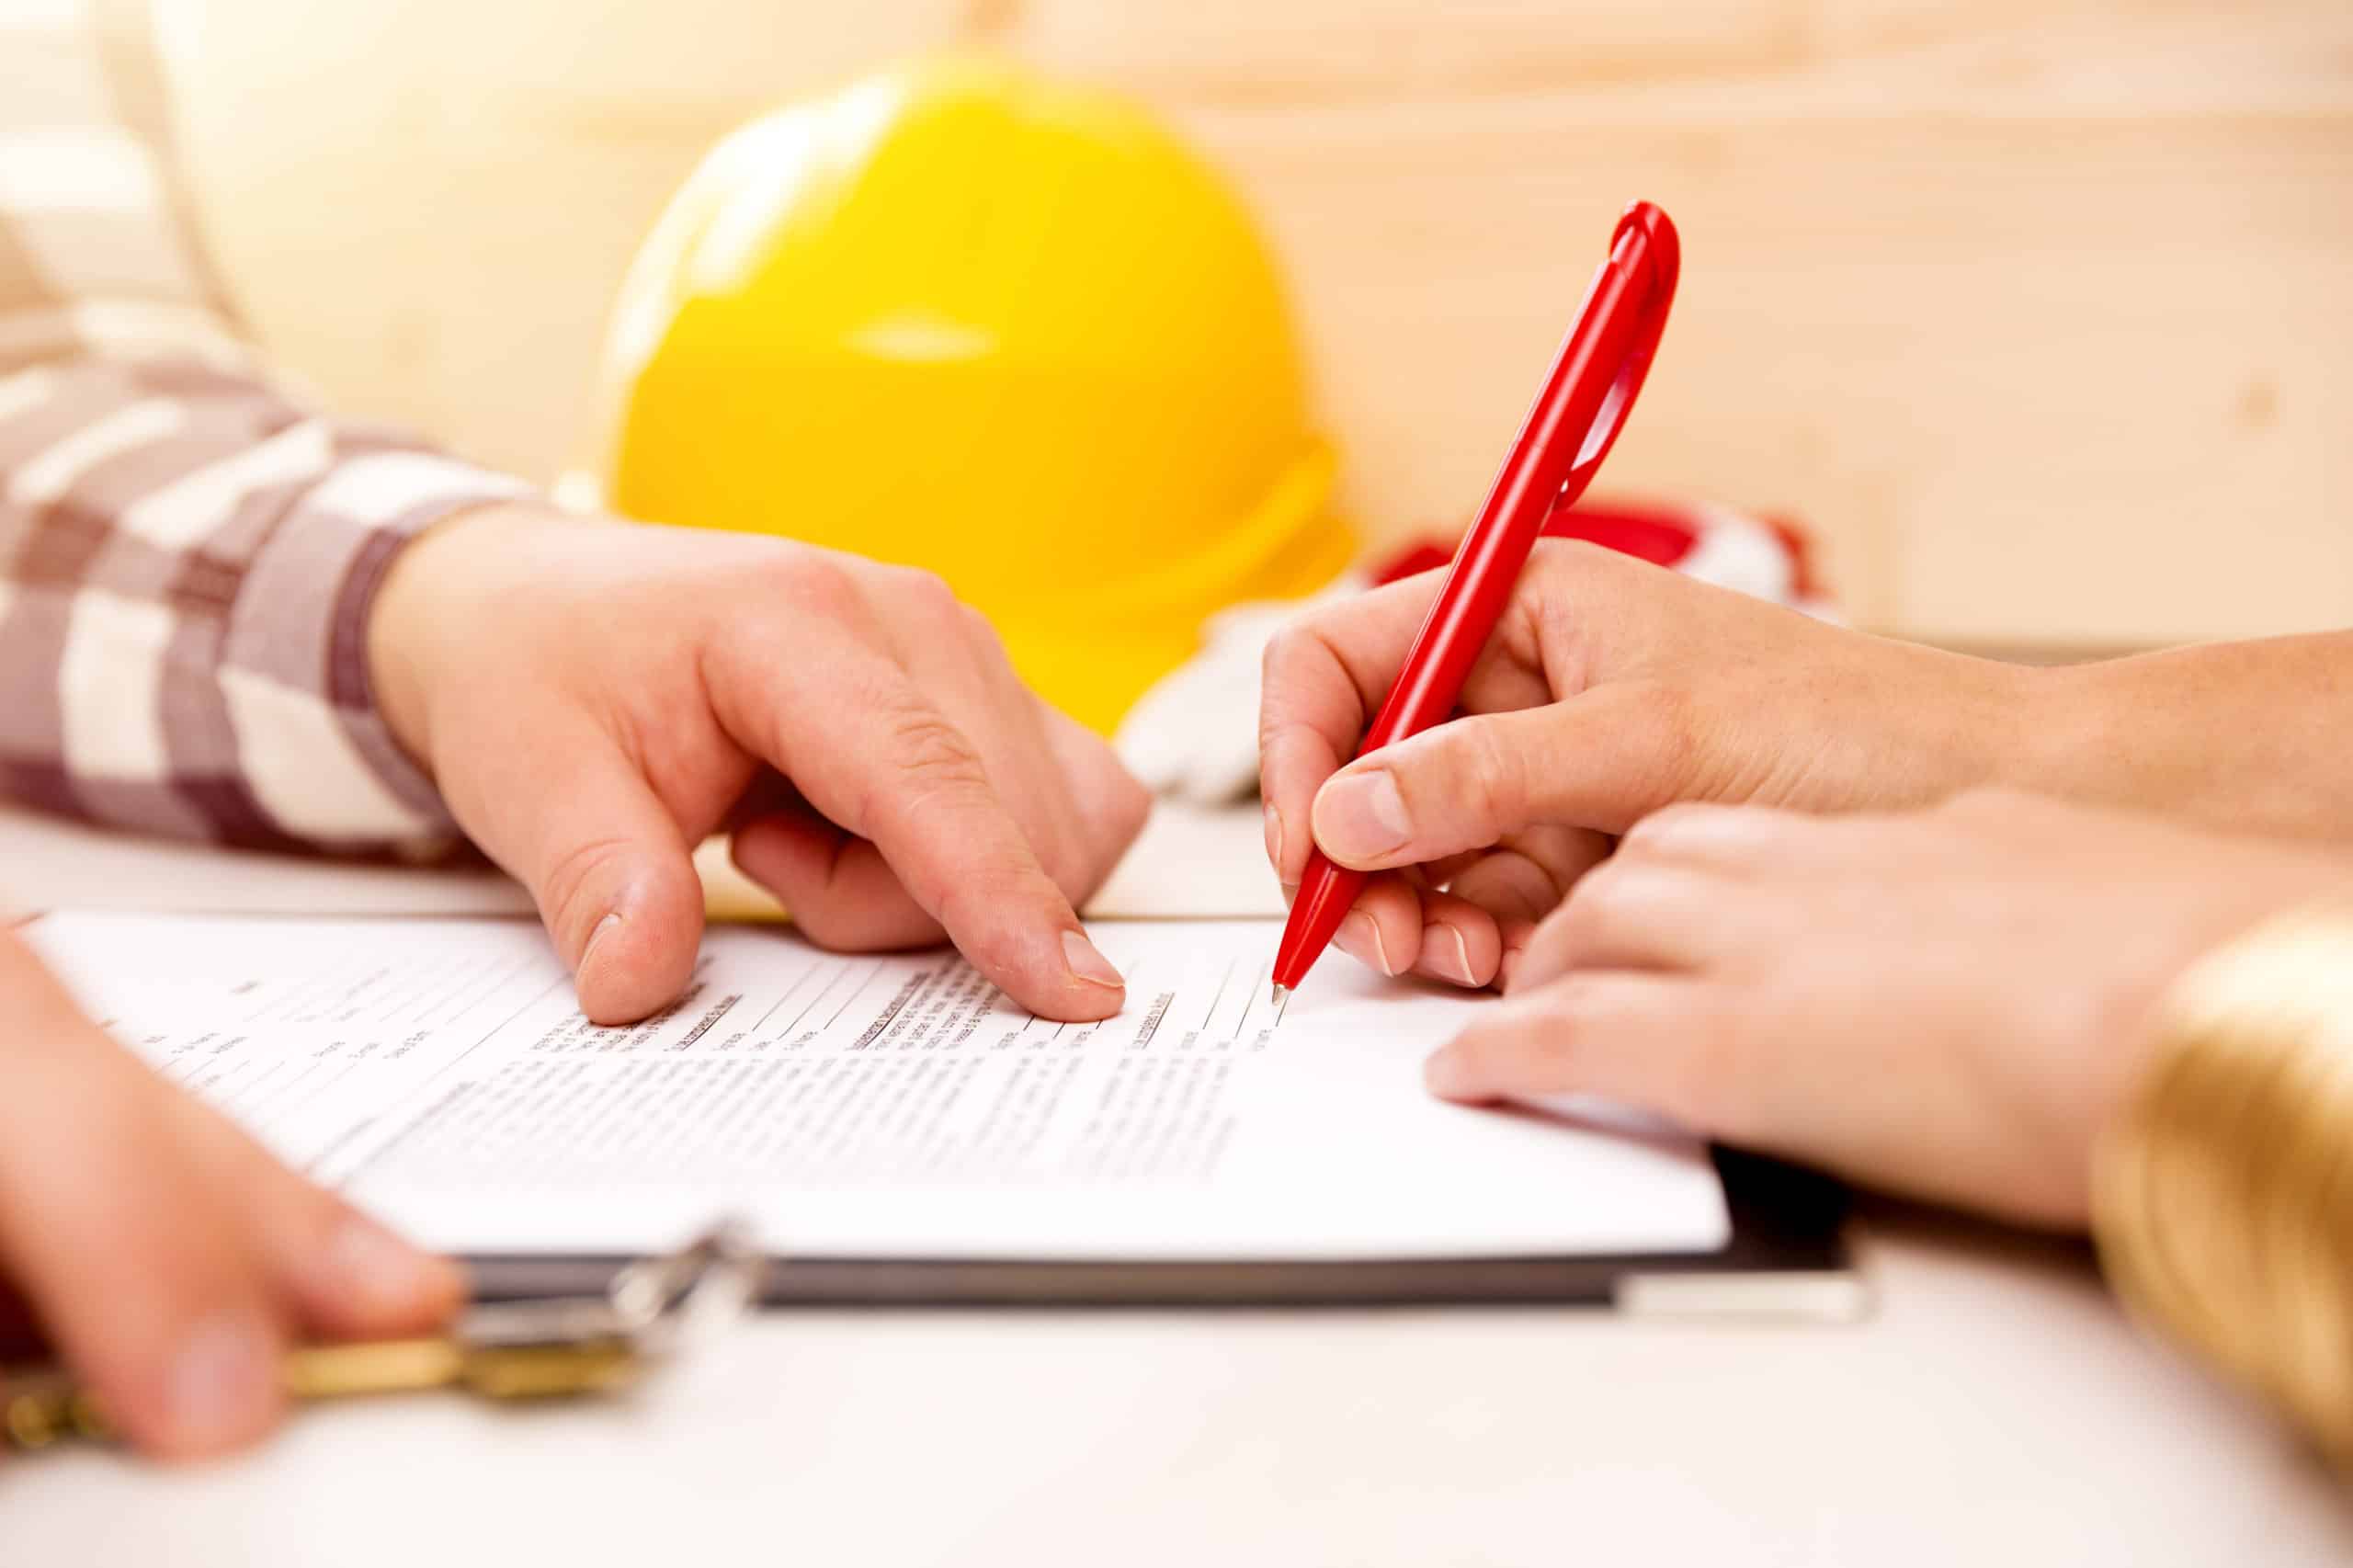 We see the hands of a contractor who offers financing points to the contract as his client signs it. A hard hat is in the background.